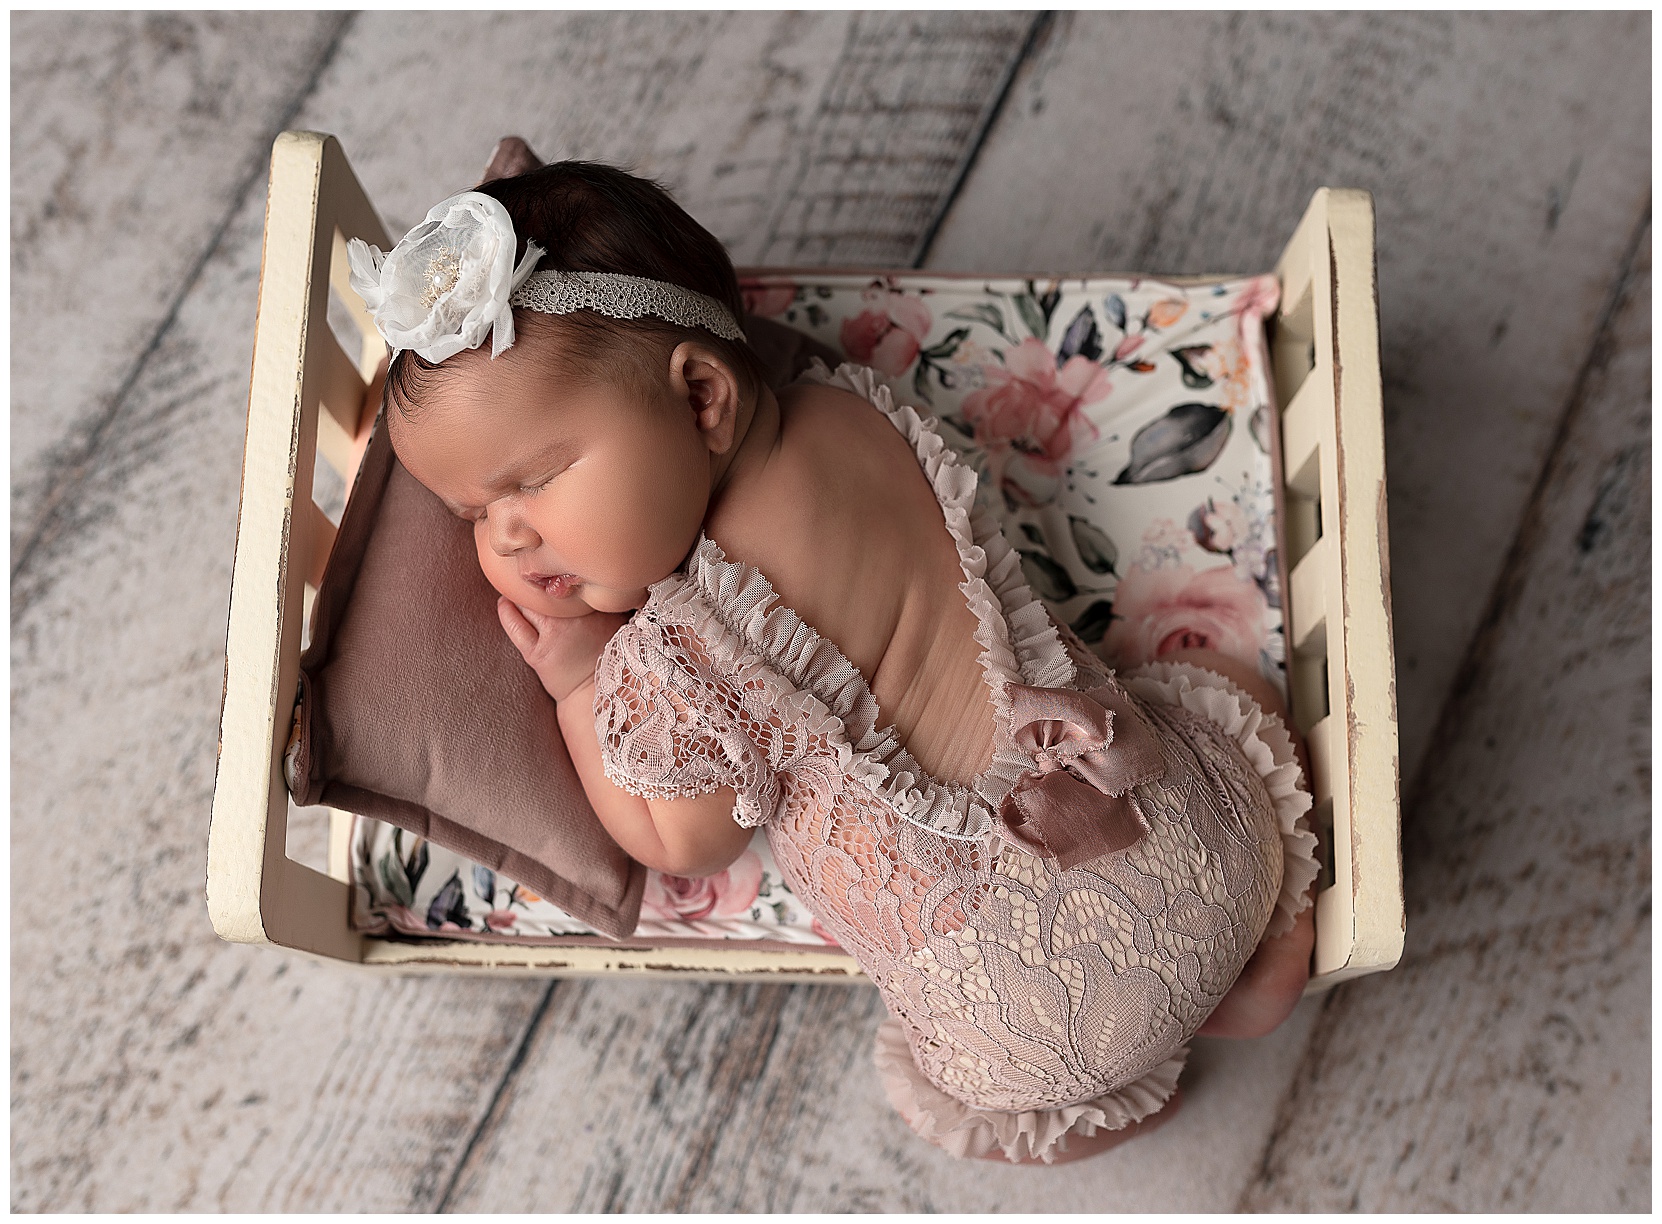 sleeping baby girl wearing a lace romper sleeping ion a white baby bed